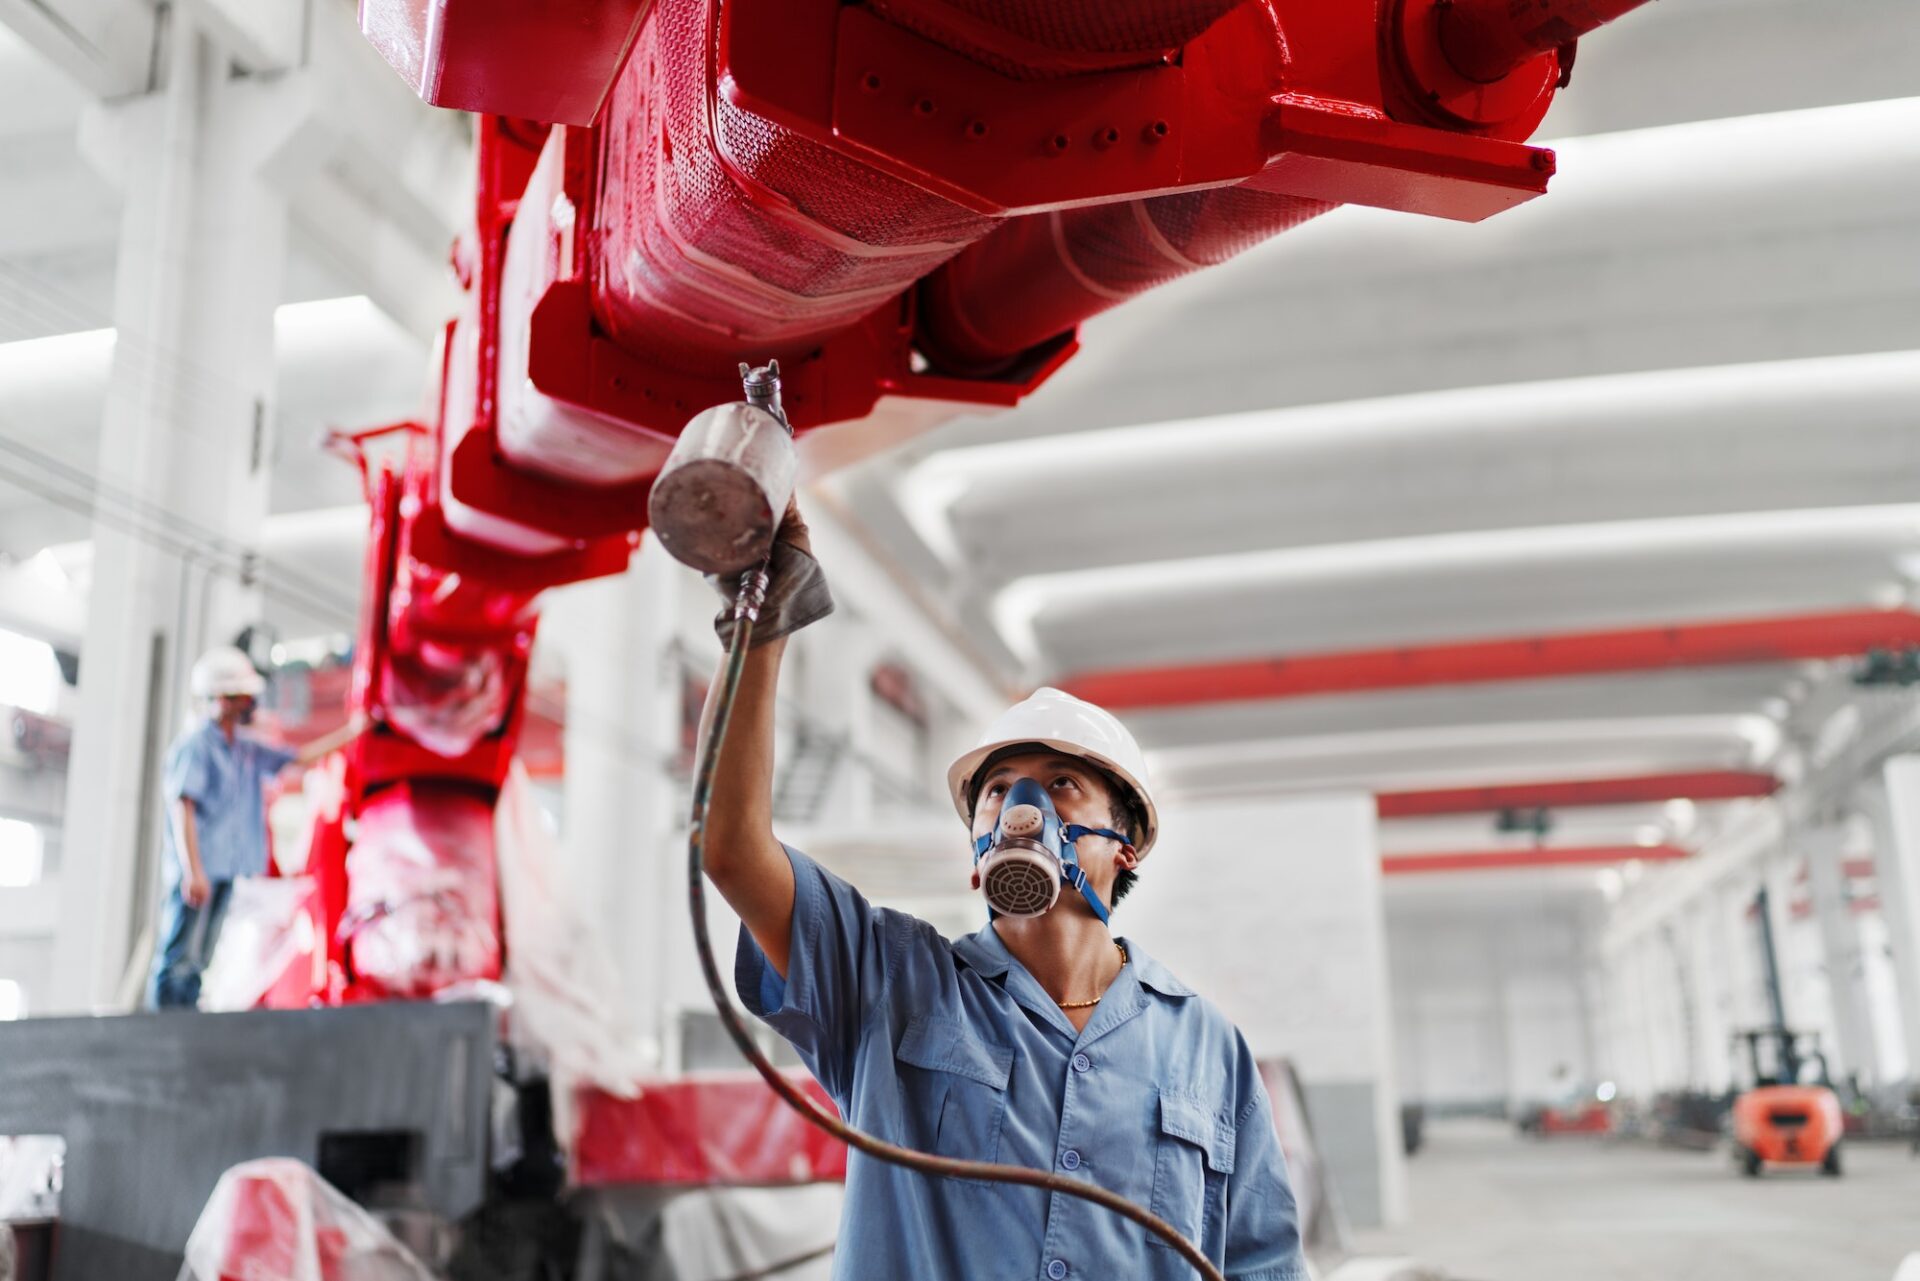 Male workers spray painting a crane arm red in factory workshop, China